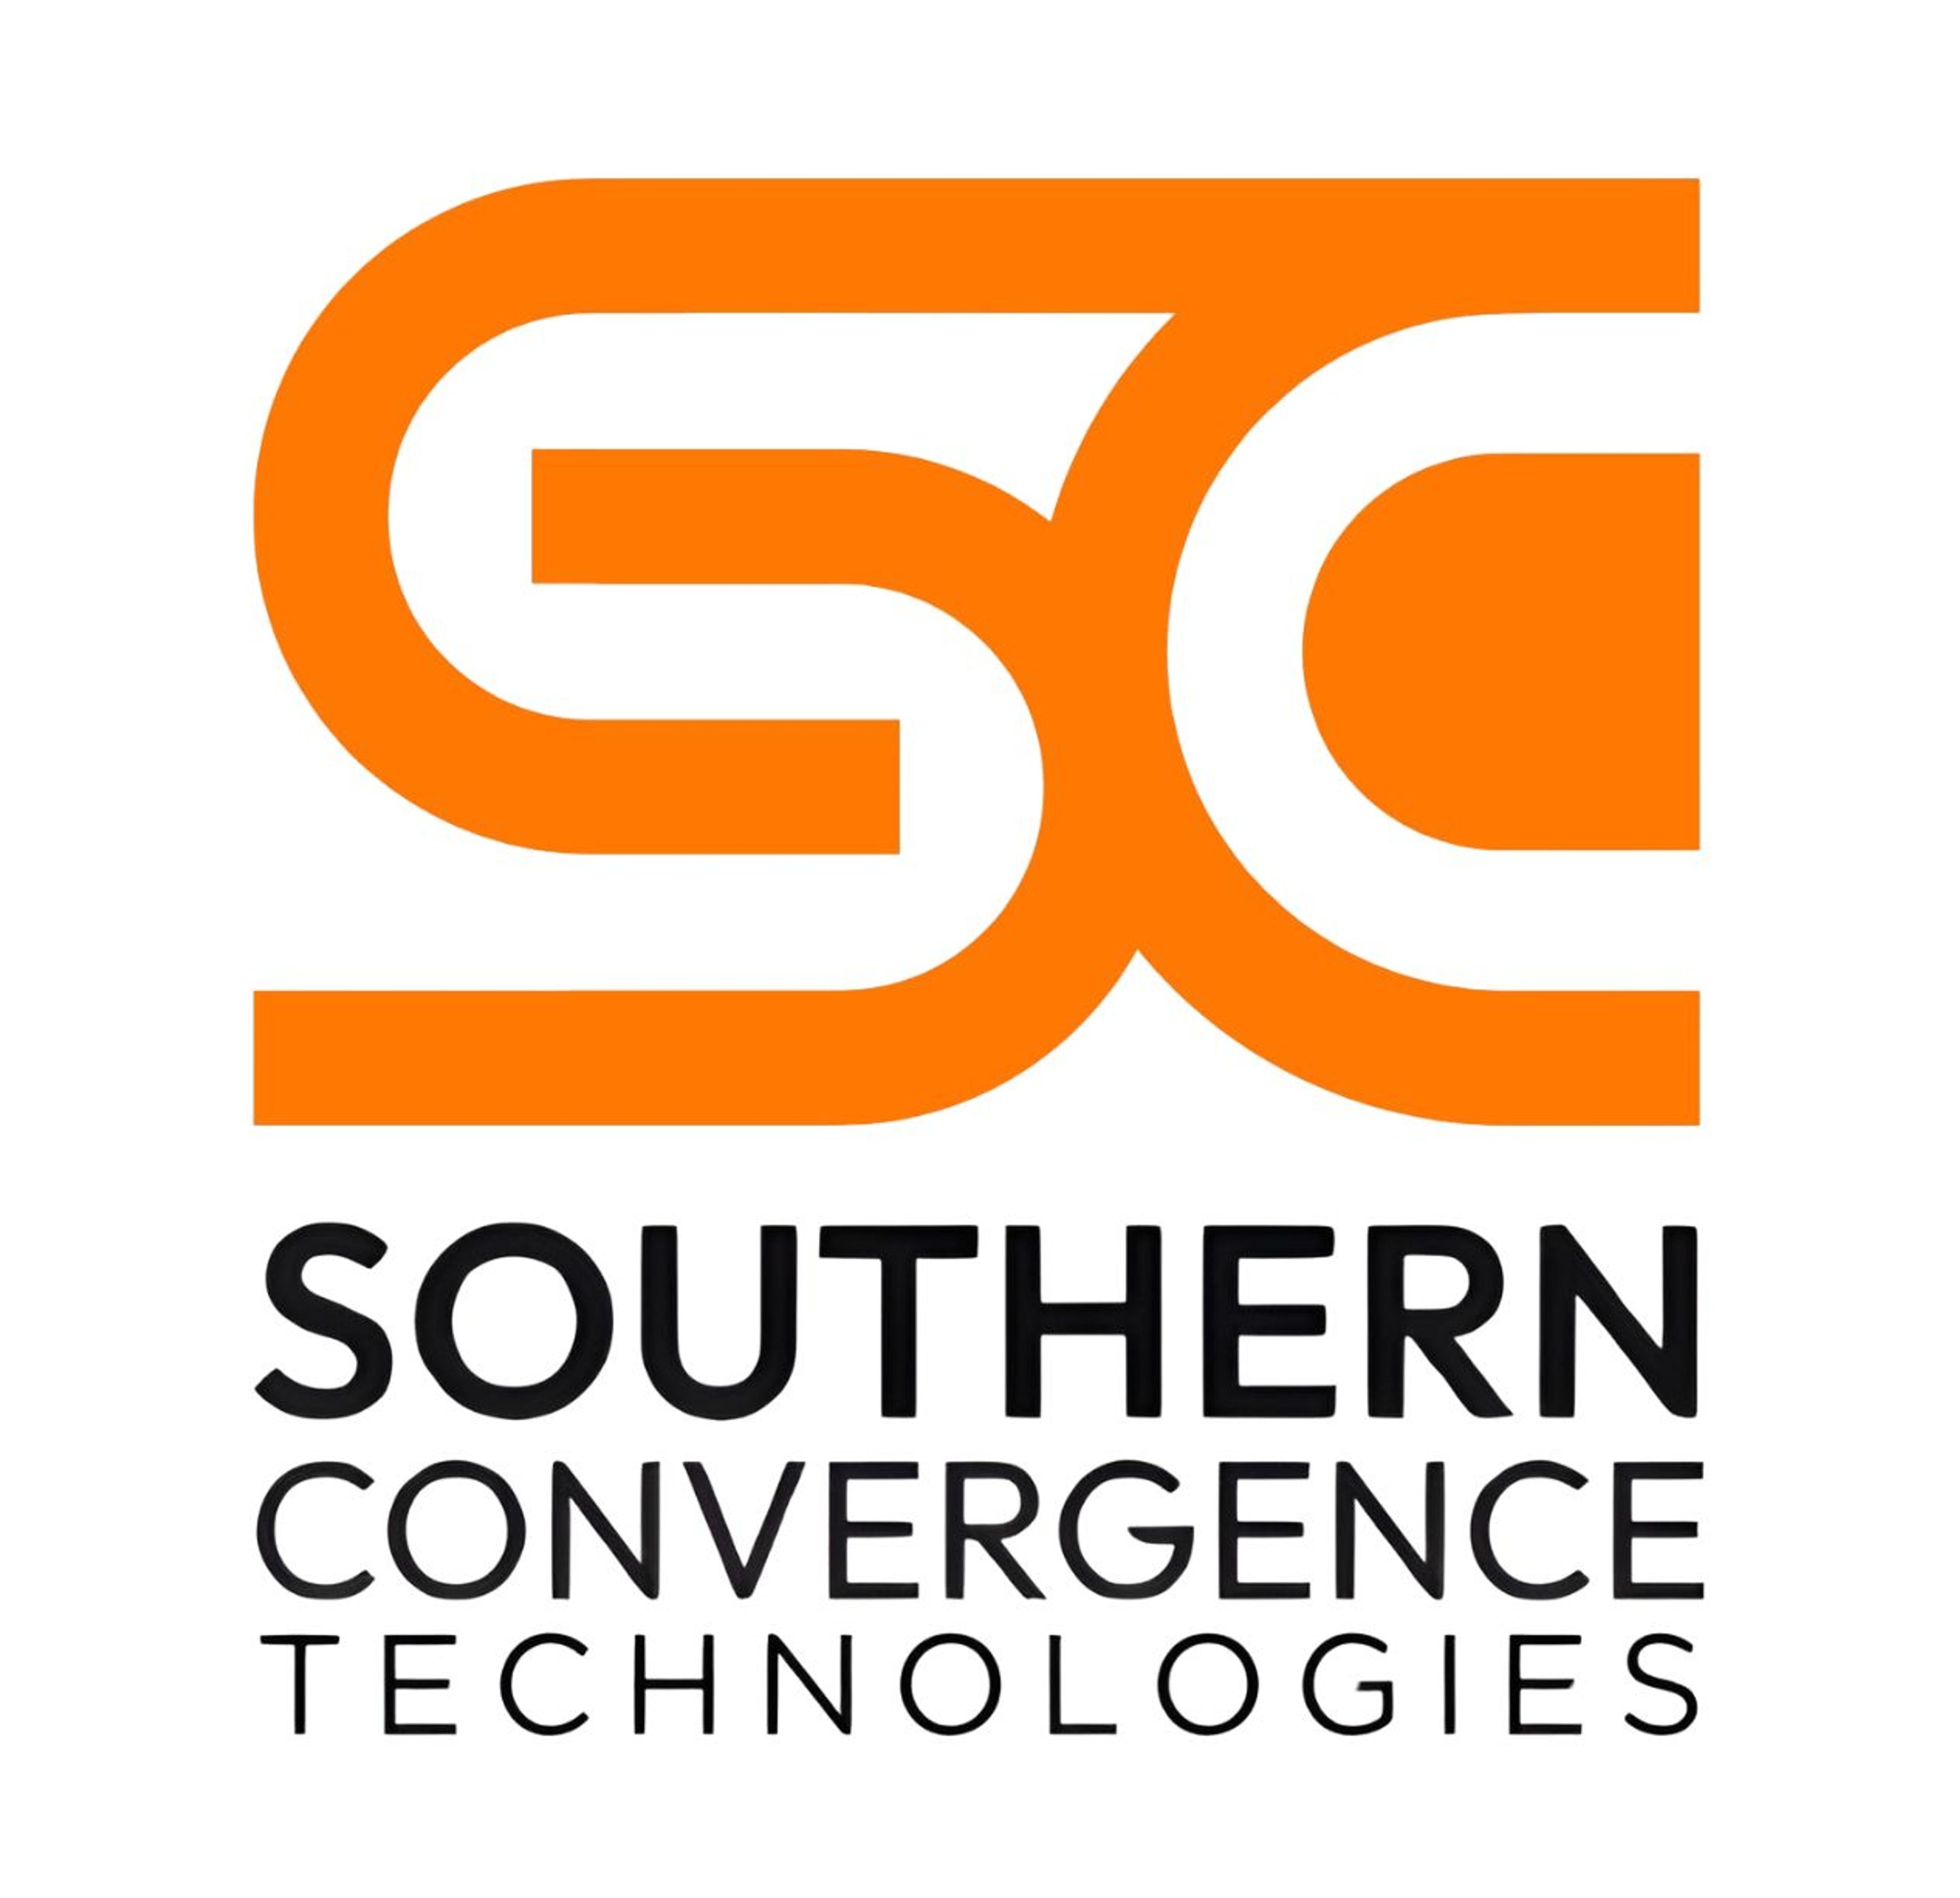 Southern Convergence Technologies